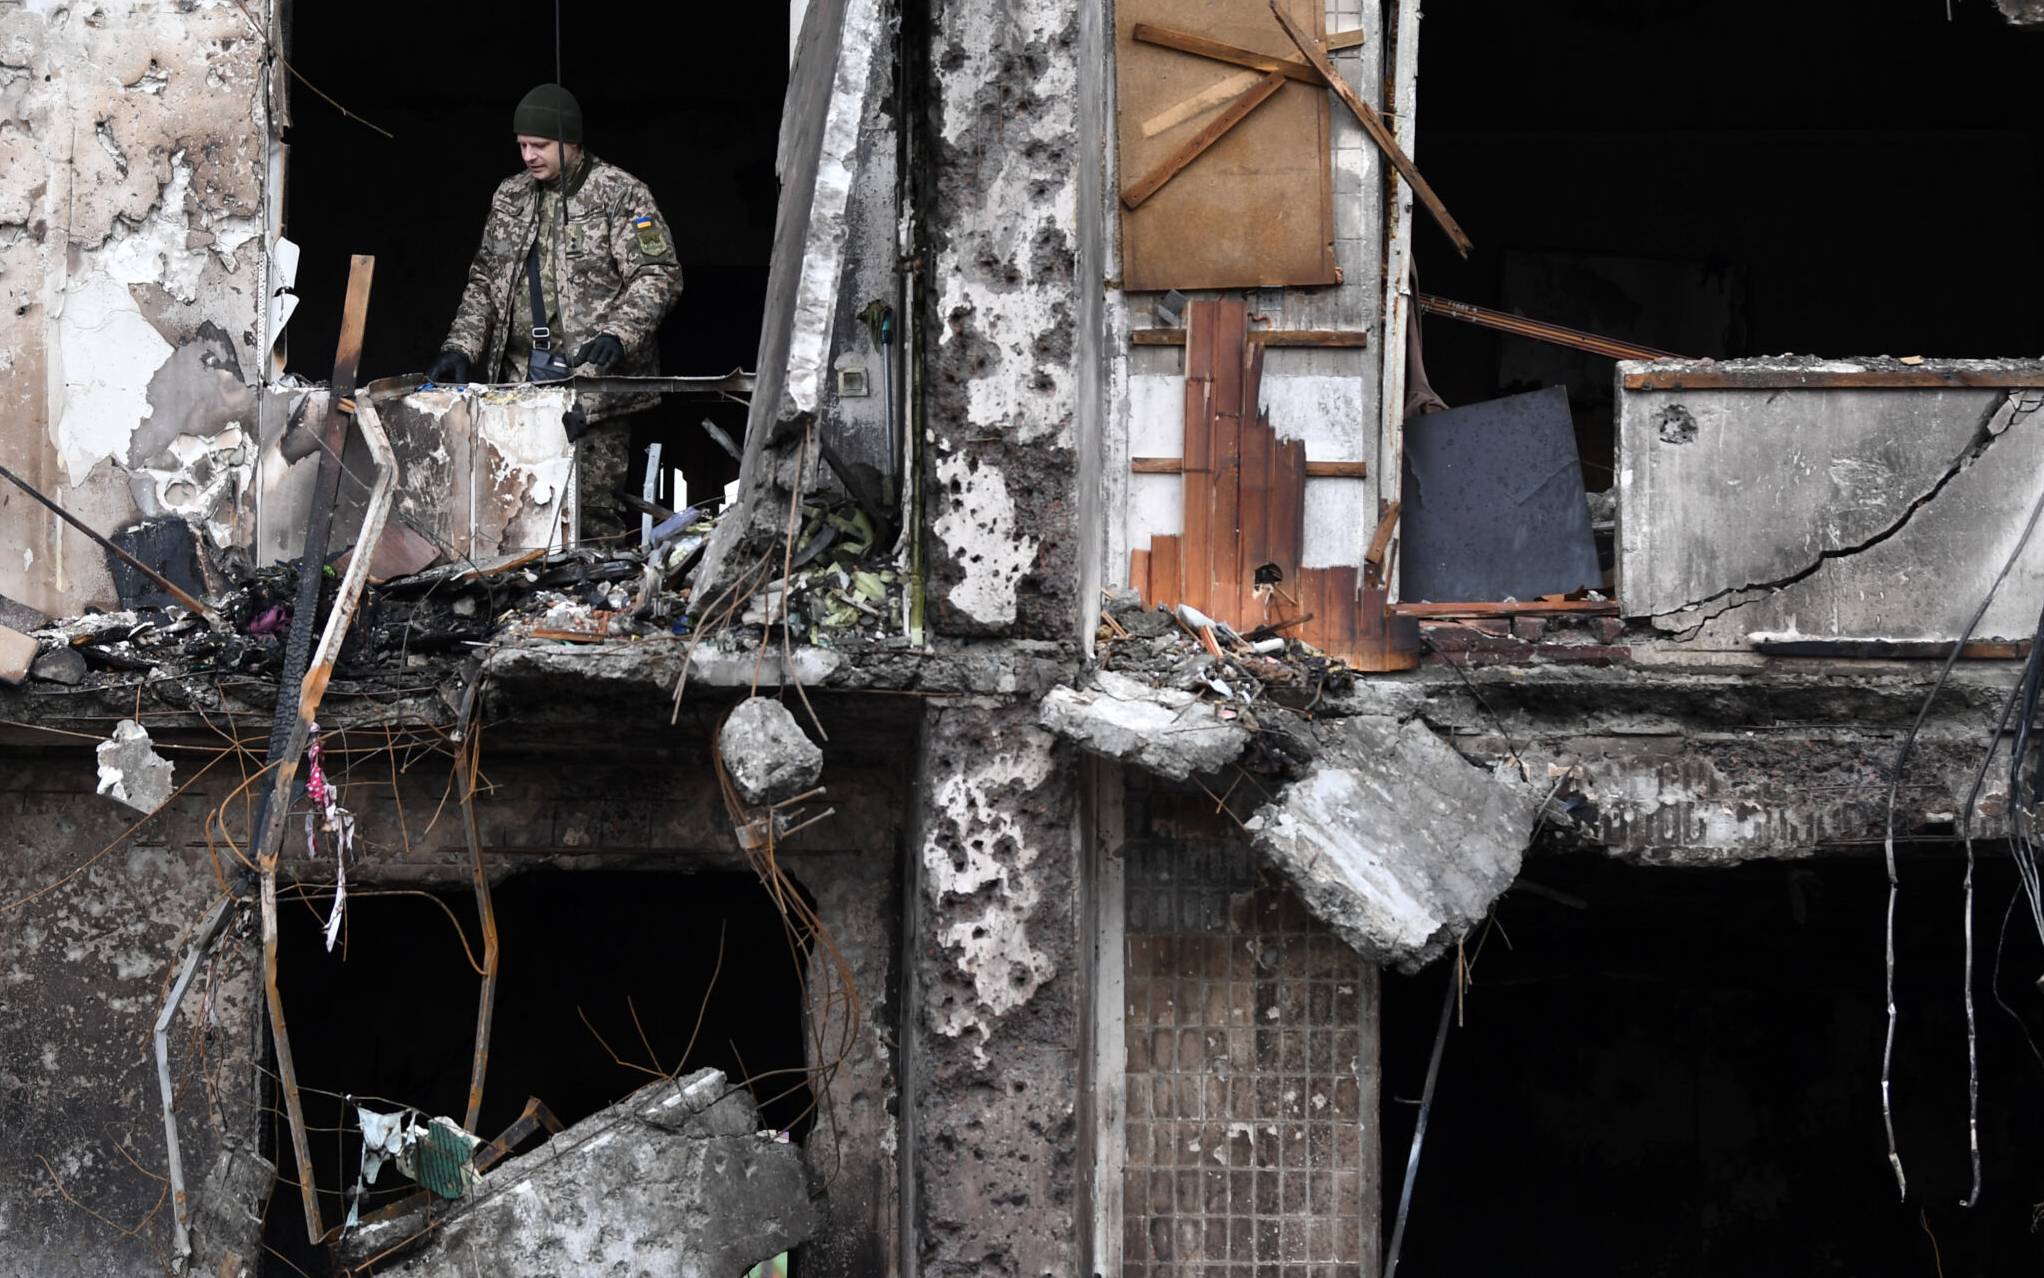 A Ukrainian serviceman is seen in the window of a damaged residential building at Koshytsa Street, a suburb of the Ukrainian capital Kyiv, where a military shell allegedly hit, on February 25, 2022. - Russian forces reached the outskirts of Kyiv on Friday as Ukrainian President Volodymyr Zelensky said the invading troops were targeting civilians and explosions could be heard in the besieged capital. Pre-dawn blasts in Kyiv set off a second day of violence after Russian President Vladimir Putin defied Western warnings to unleash a full-scale ground invasion and air assault on Thursday that quickly claimed dozens of lives and displaced at least 100,000 people. (Photo by Daniel LEAL / AFP)